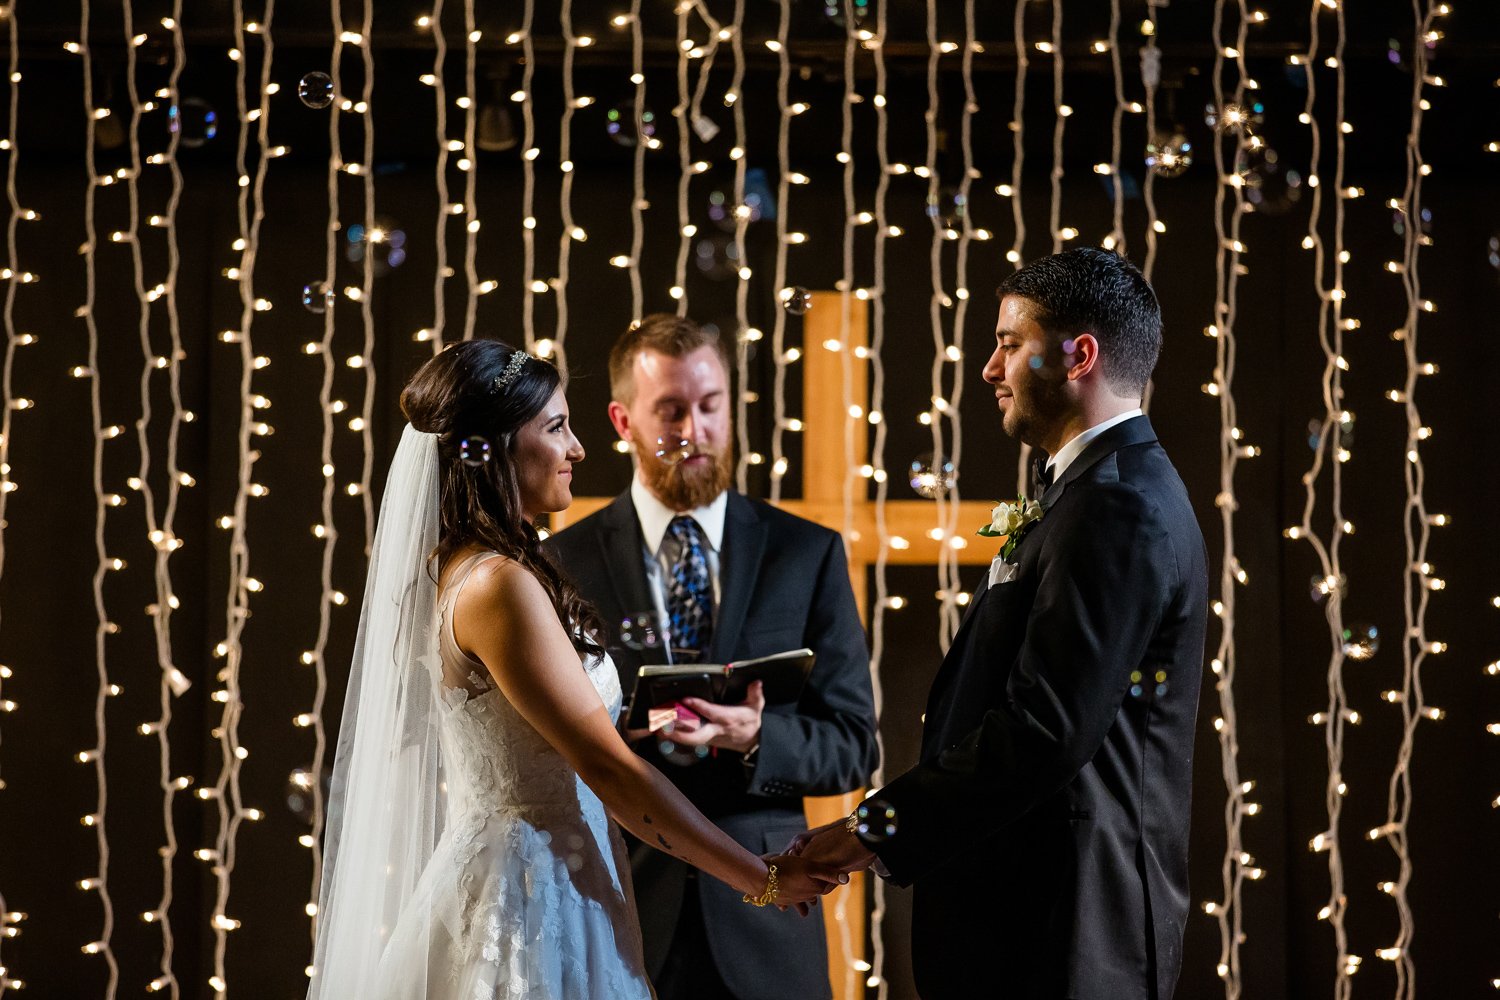 Peoria Wedding ceremony with bubbles and string lights